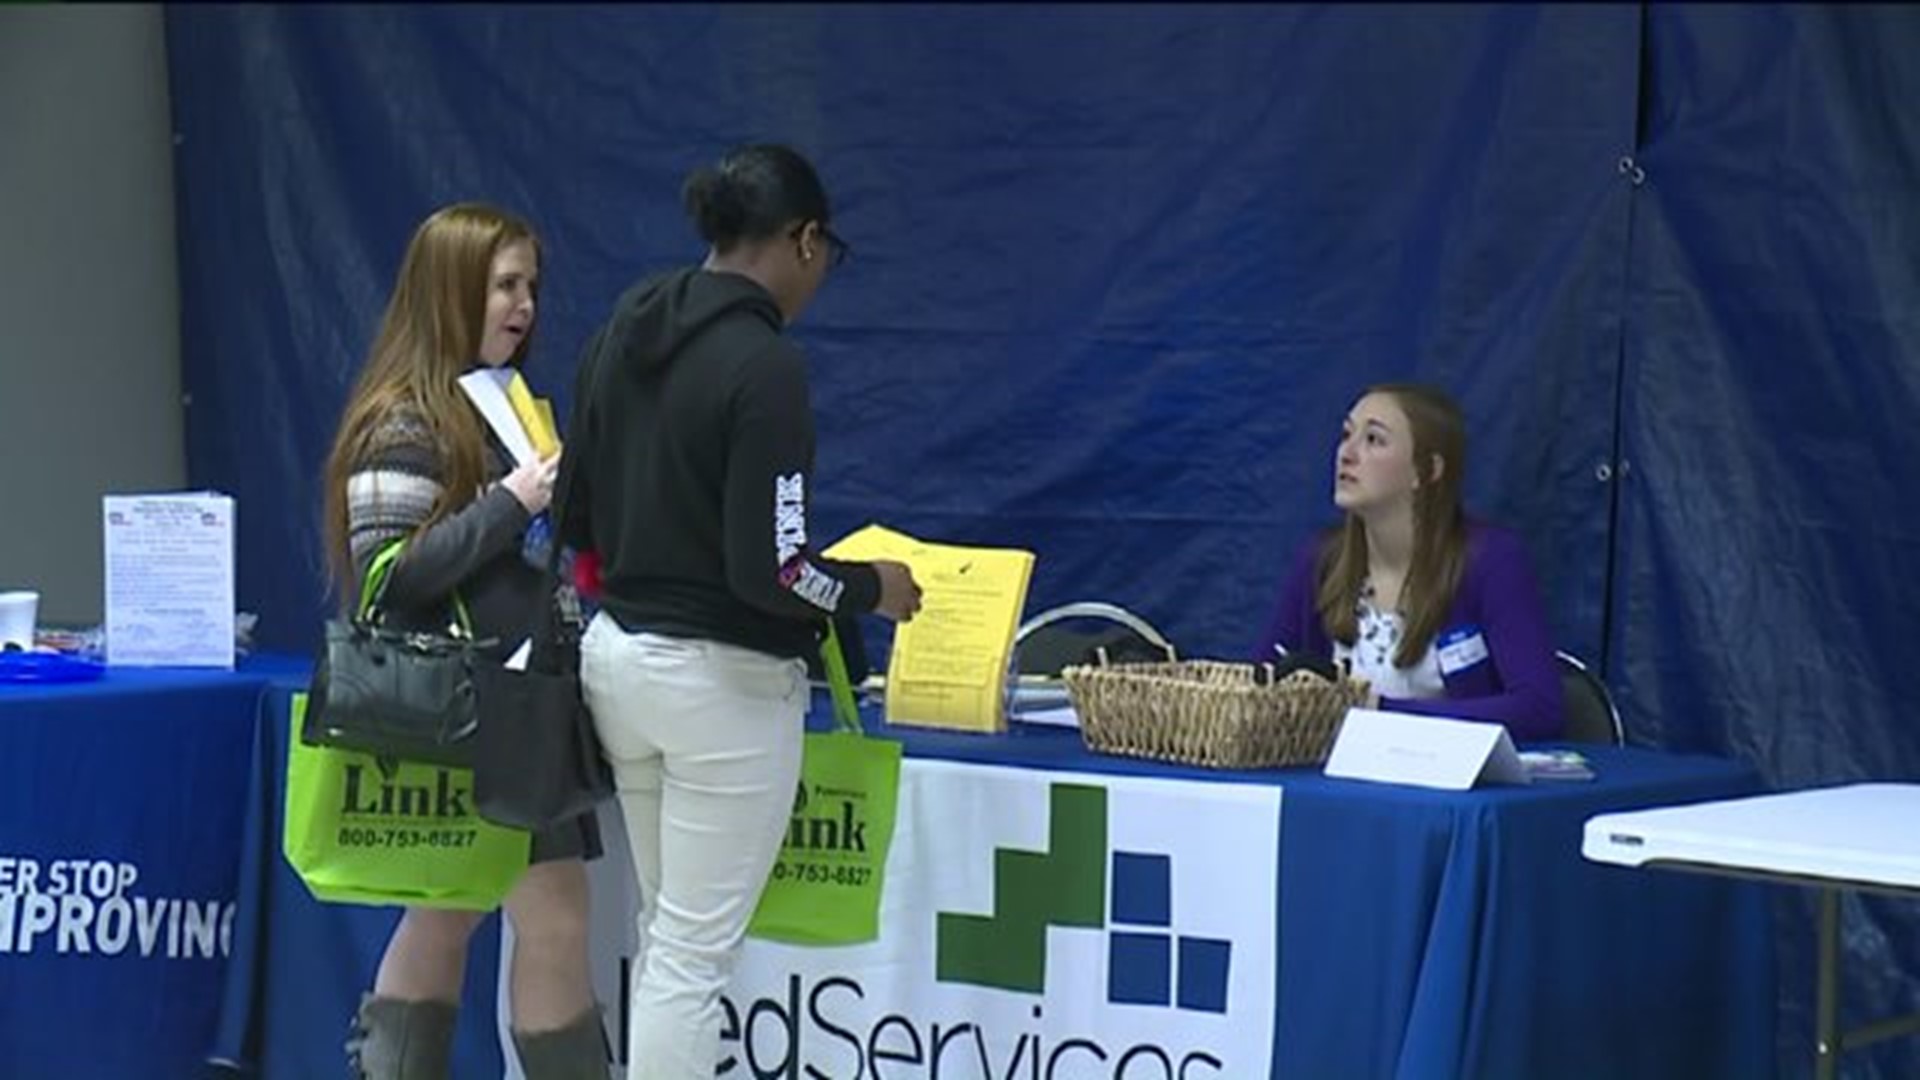 Getting Real World Experience at Special Needs Job Fair